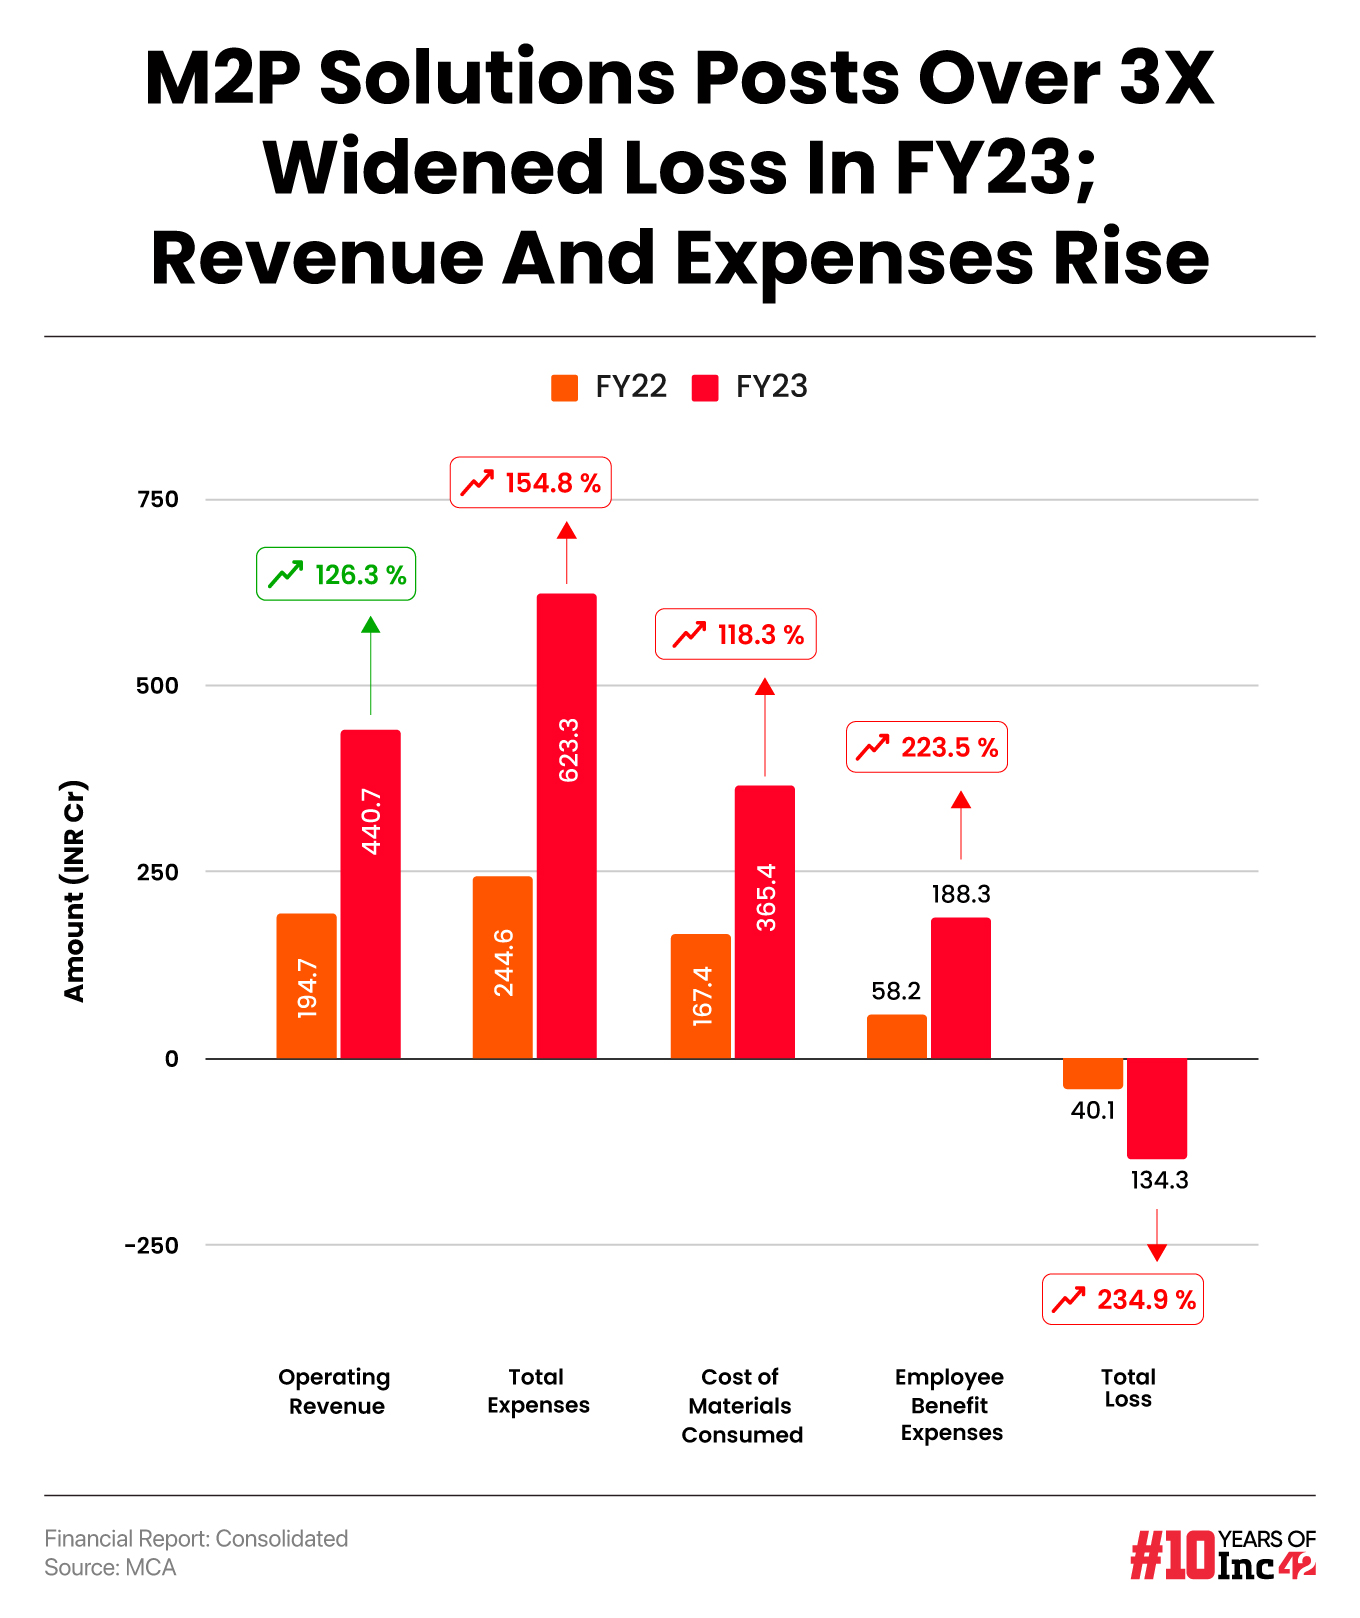  M2P Solutions Posts Over 3X Widened Loss In FY23; Revenue And Expenses Rise